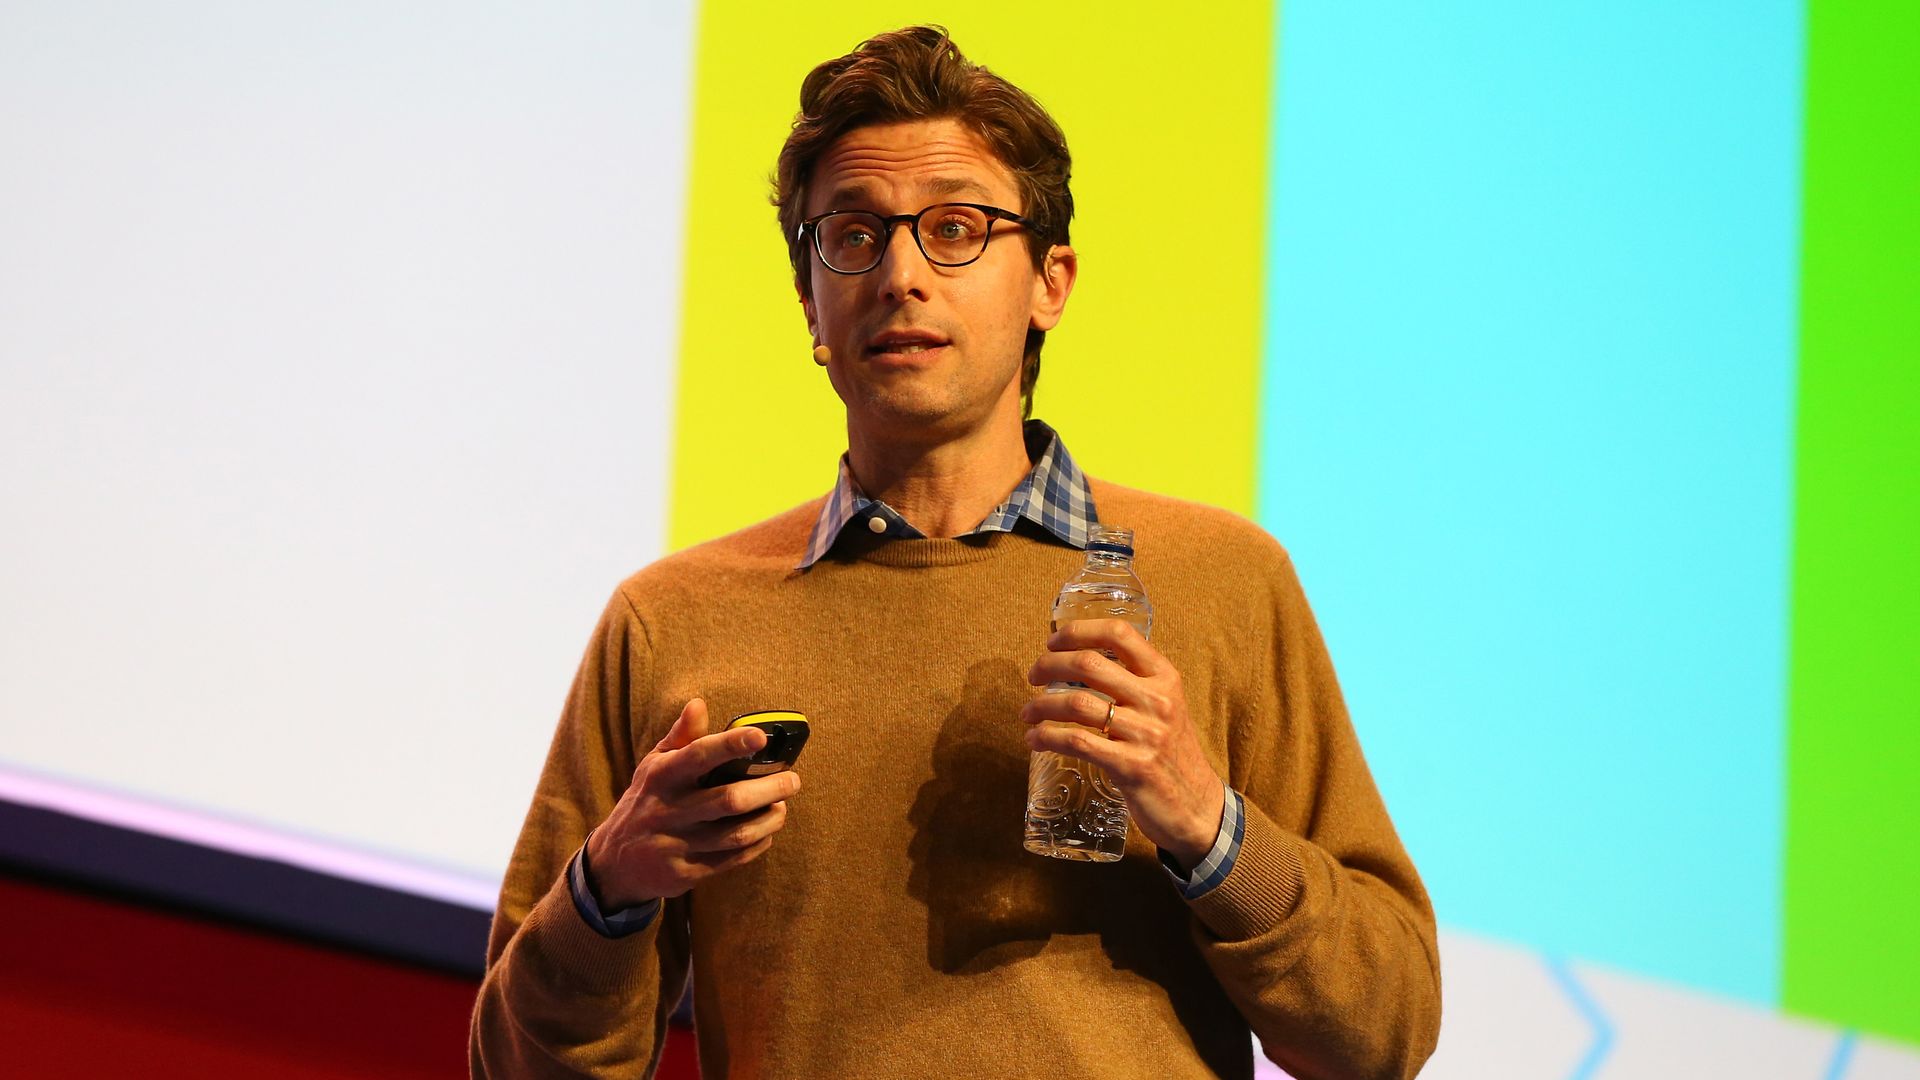 BuzzFeed founder and CEO Jonah Peretti in 2016.